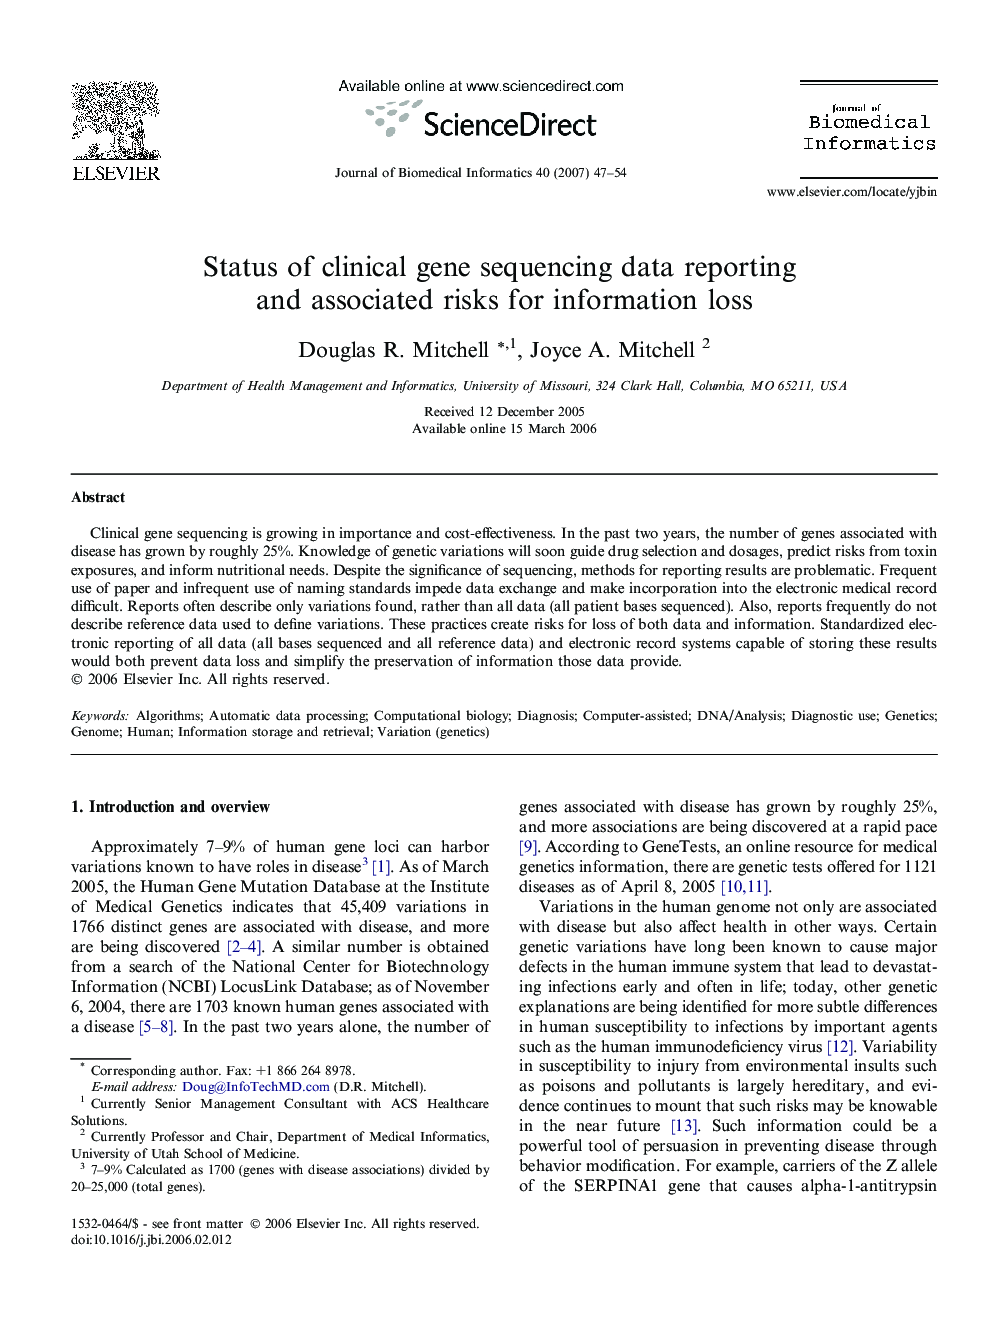 Status of clinical gene sequencing data reporting and associated risks for information loss